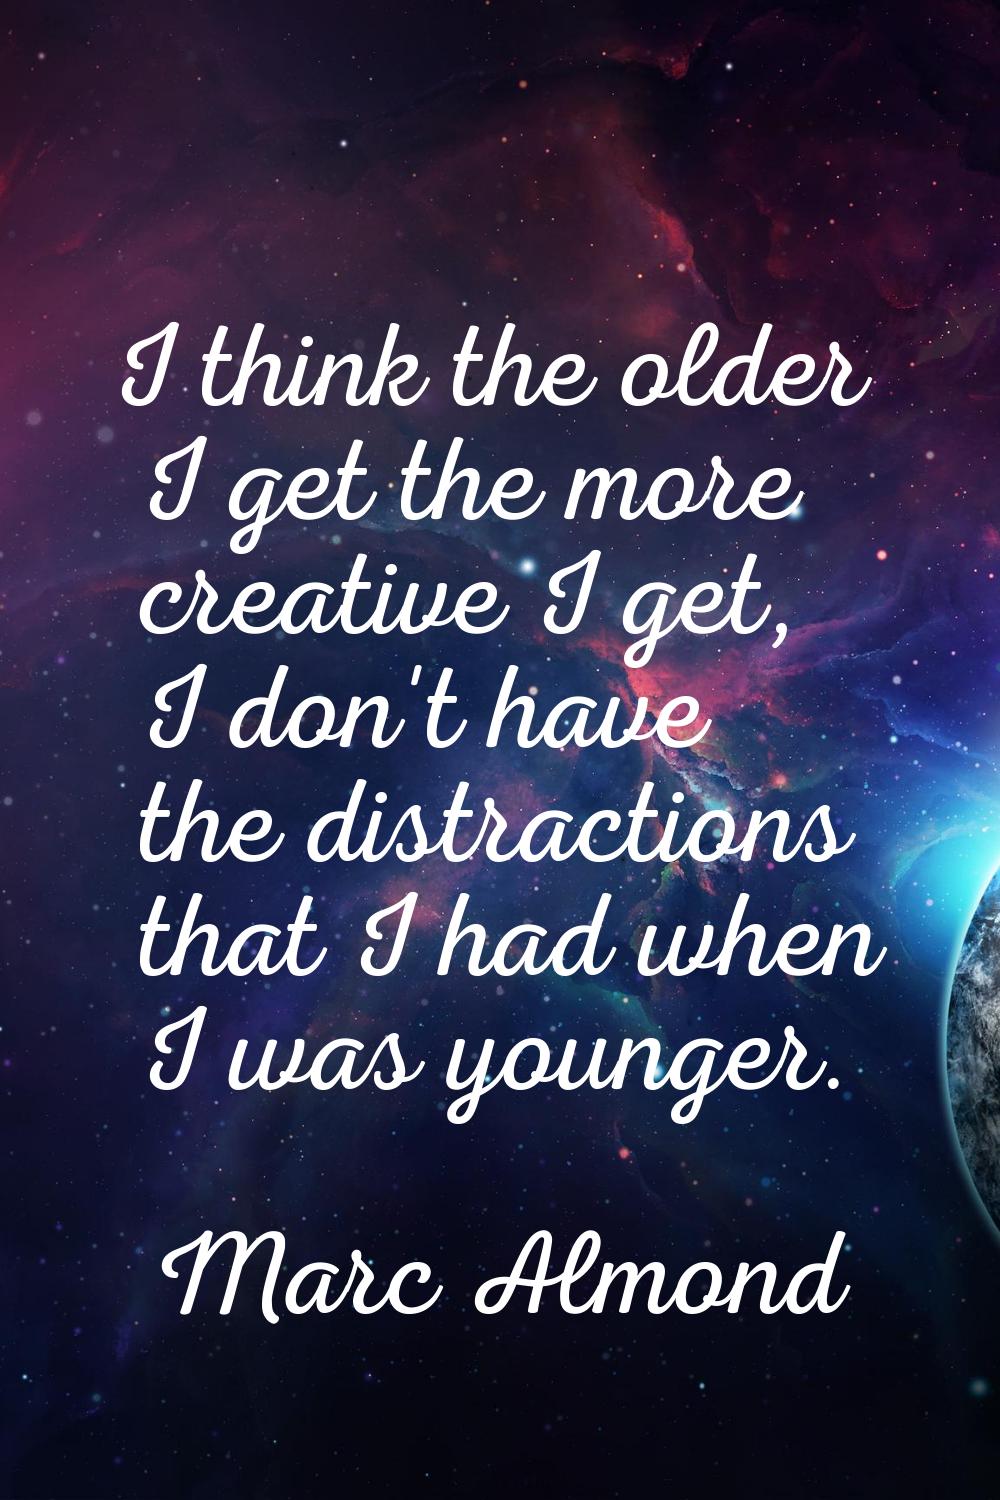 I think the older I get the more creative I get, I don't have the distractions that I had when I wa